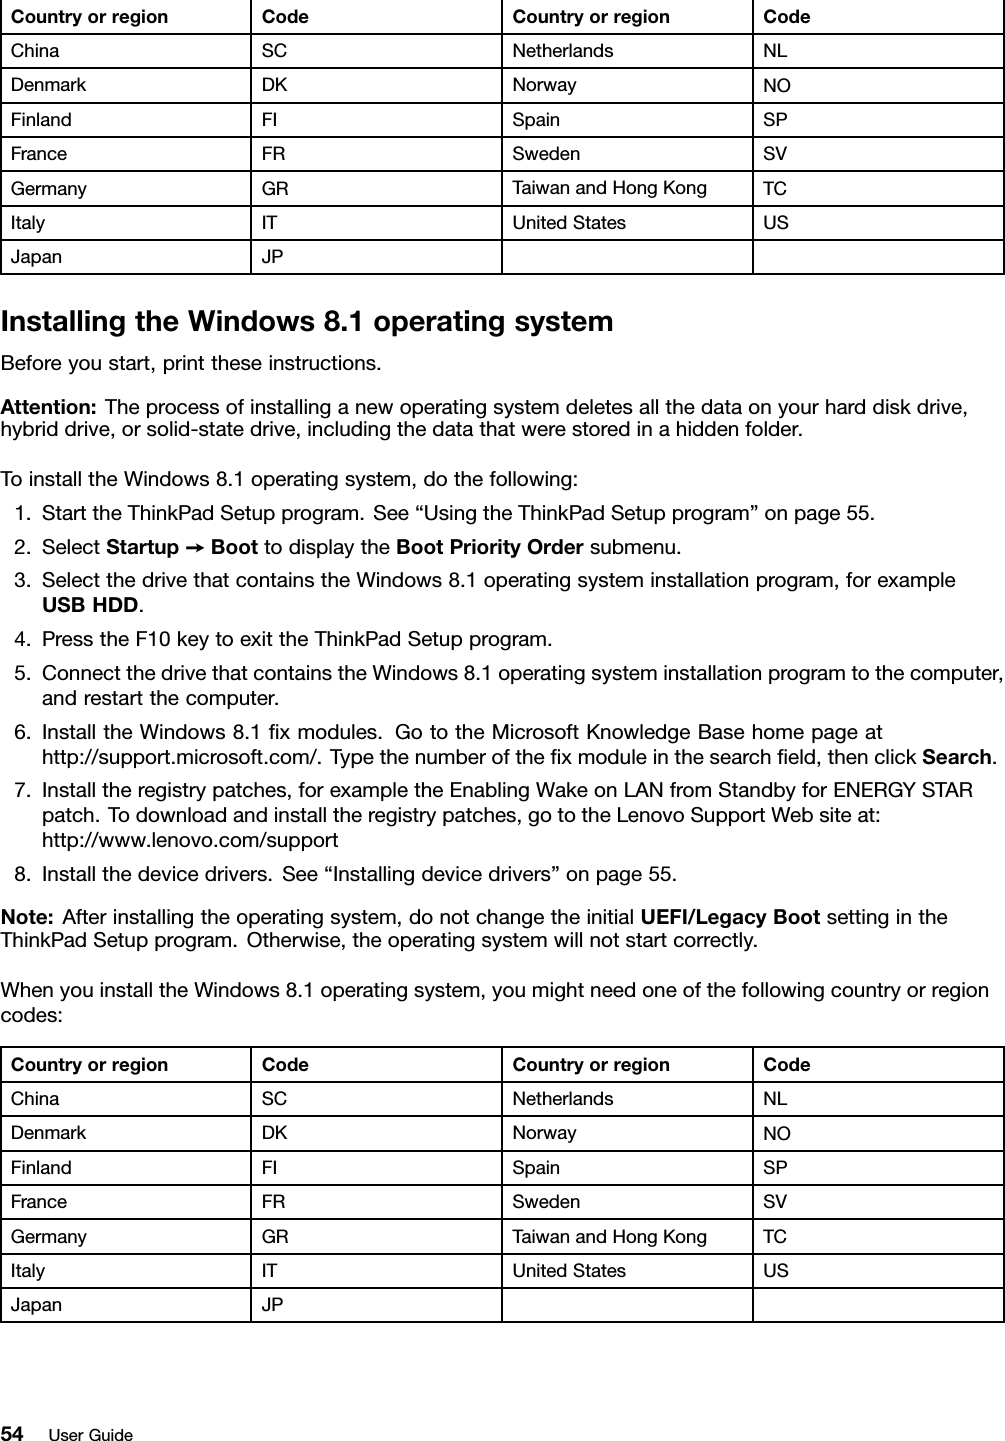 Country or region Code Country or region CodeChina SC Netherlands NLDenmark DK Norway NOFinland FI Spain SPFrance FR Sweden SVGermany GR Taiwan and Hong Kong TCItaly IT United States USJapan JPInstalling the Windows 8.1 operating systemBefore you start, print these instructions.Attention: The process of installing a new operating system deletes all the data on your hard disk drive,hybrid drive, or solid-state drive, including the data that were stored in a hidden folder.To install the Windows 8.1 operating system, do the following:1. Start the ThinkPad Setup program. See “Using the ThinkPad Setup program” on page 55.2. Select Startup ➙Boot to display the Boot Priority Order submenu.3. Select the drive that contains the Windows 8.1 operating system installation program, for exampleUSB HDD.4. Press the F10 key to exit the ThinkPad Setup program.5. Connect the drive that contains the Windows 8.1 operating system installation program to the computer,and restart the computer.6. Install the Windows 8.1 ﬁx modules. Go to the Microsoft Knowledge Base home page athttp://support.microsoft.com/. Type the number of the ﬁx module in the search ﬁeld, then click Search.7. Install the registry patches, for example the Enabling Wake on LAN from Standby for ENERGY STARpatch. To download and install the registry patches, go to the Lenovo Support Web site at:http://www.lenovo.com/support8. Install the device drivers. See “Installing device drivers” on page 55.Note: After installing the operating system, do not change the initial UEFI/Legacy Boot setting in theThinkPad Setup program. Otherwise, the operating system will not start correctly.When you install the Windows 8.1 operating system, you might need one of the following country or regioncodes:Country or region Code Country or region CodeChina SC Netherlands NLDenmark DK Norway NOFinland FI Spain SPFrance FR Sweden SVGermany GR Taiwan and Hong Kong TCItaly IT United States USJapan JP54 User Guide